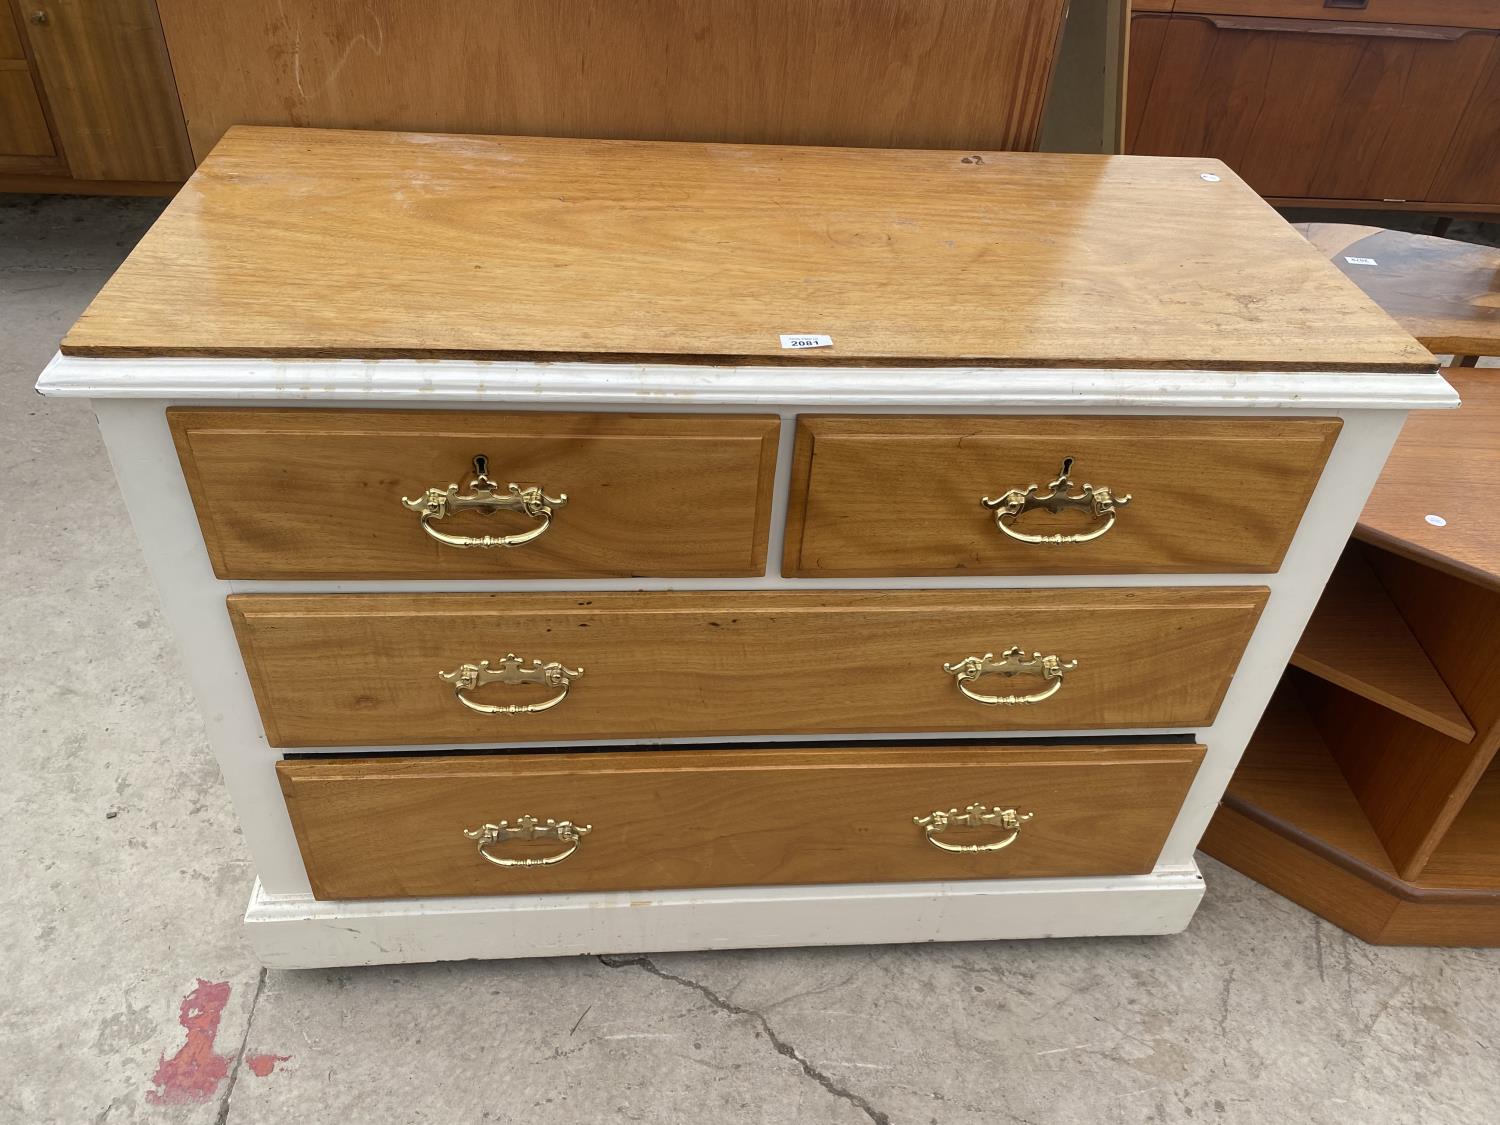 A SATINWOOD AND PAINTED CHEST OF TWO SHORT AND TWO LONG DRAWERS WITH BRASS HANDLES, 40.5" WIDE